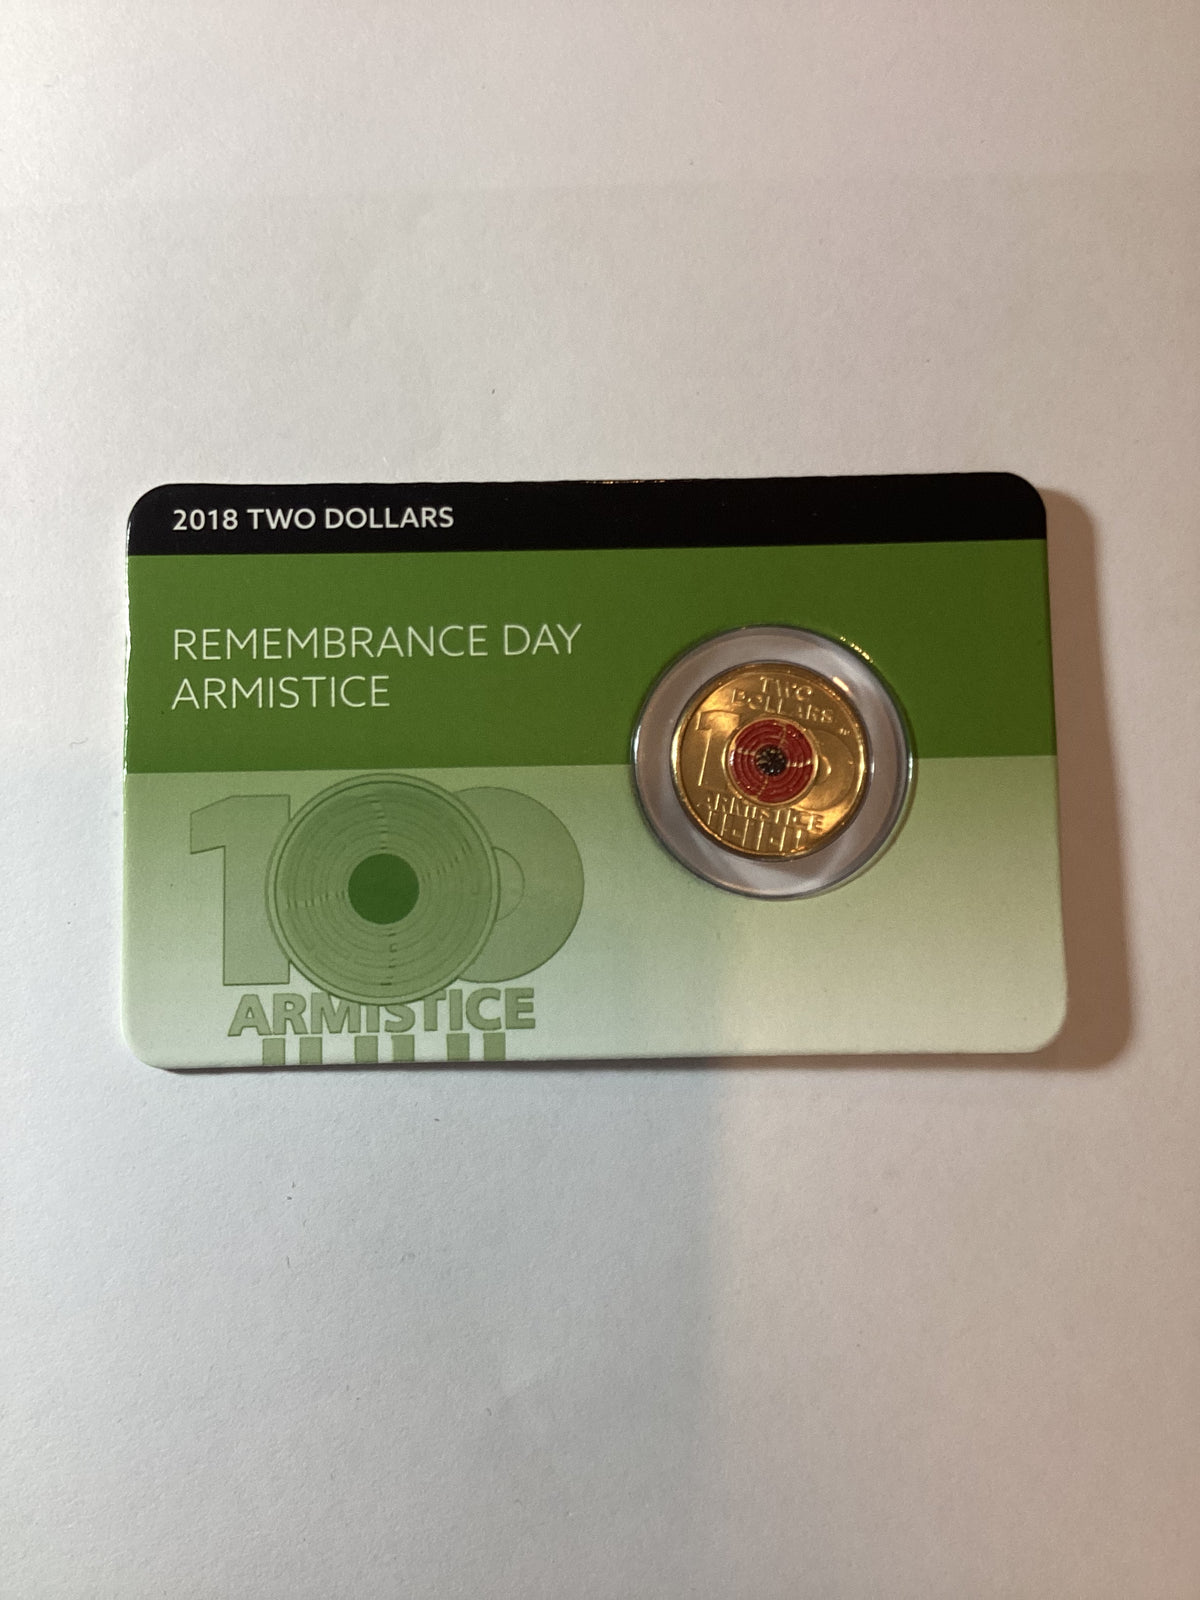 2018 remembrance day armistice 2018 two dollar coin